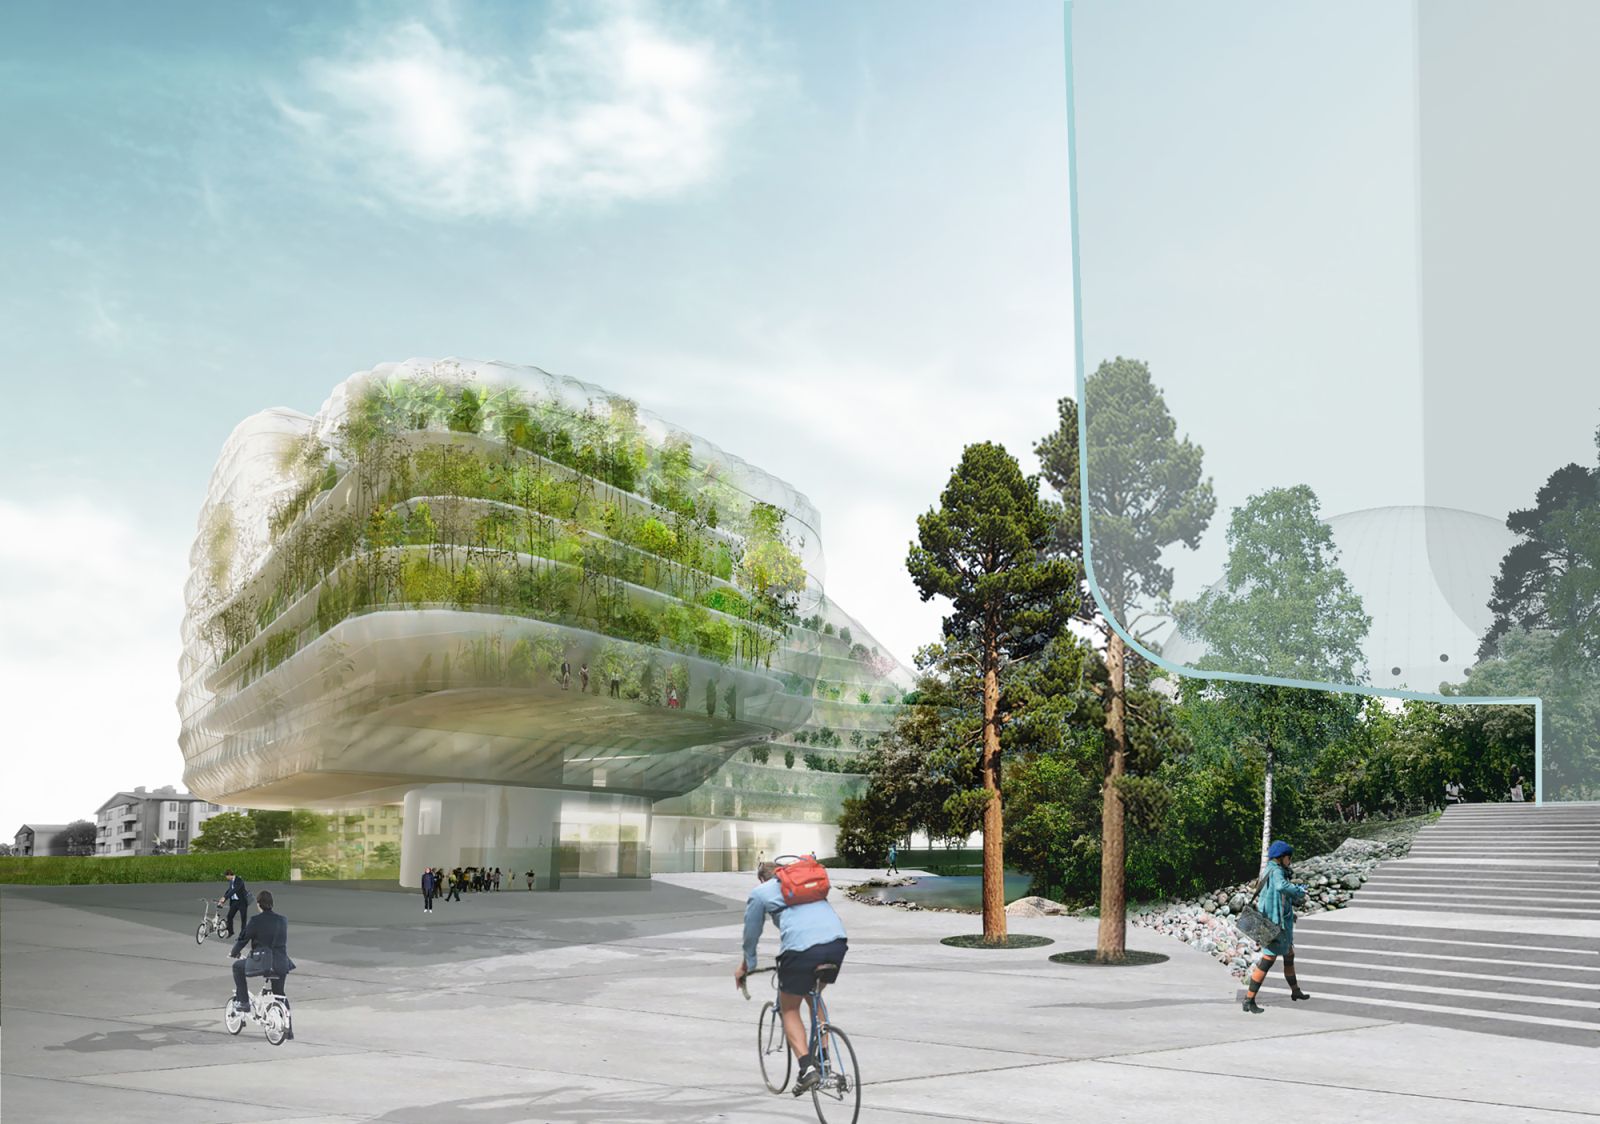 Drivhus – Planning & Administrative Offices for Stockholm